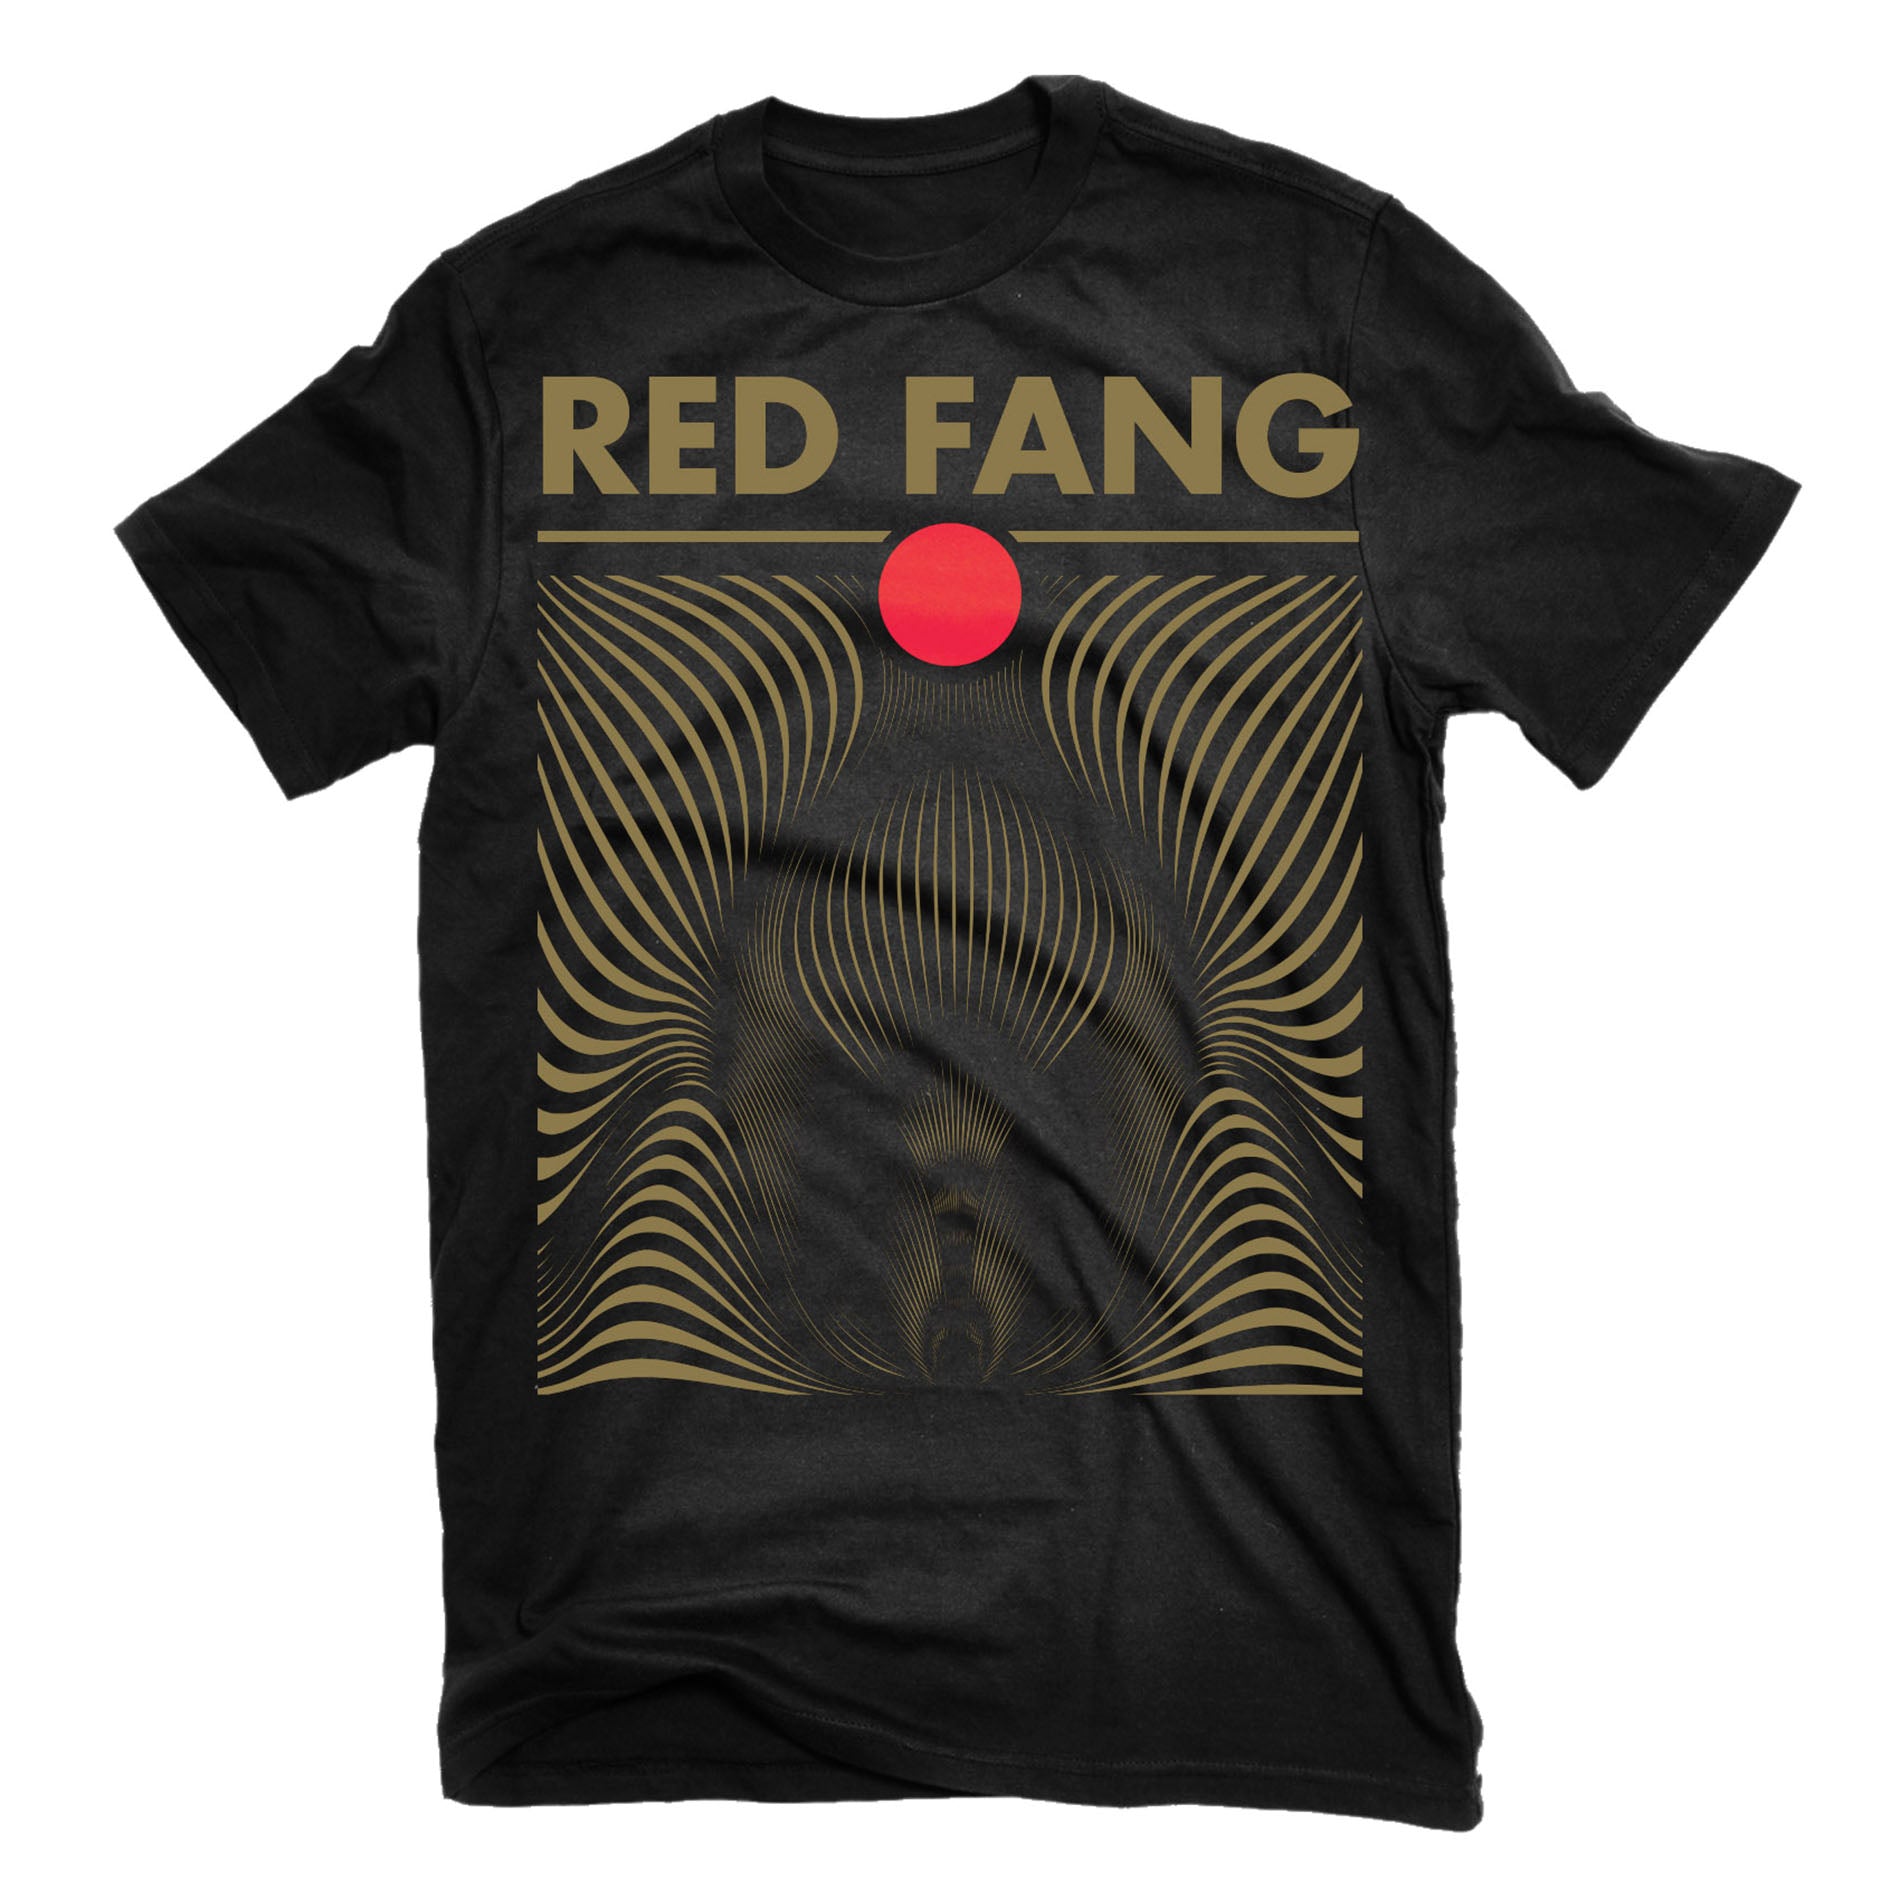 Red Fang "Only Ghosts" T-Shirt